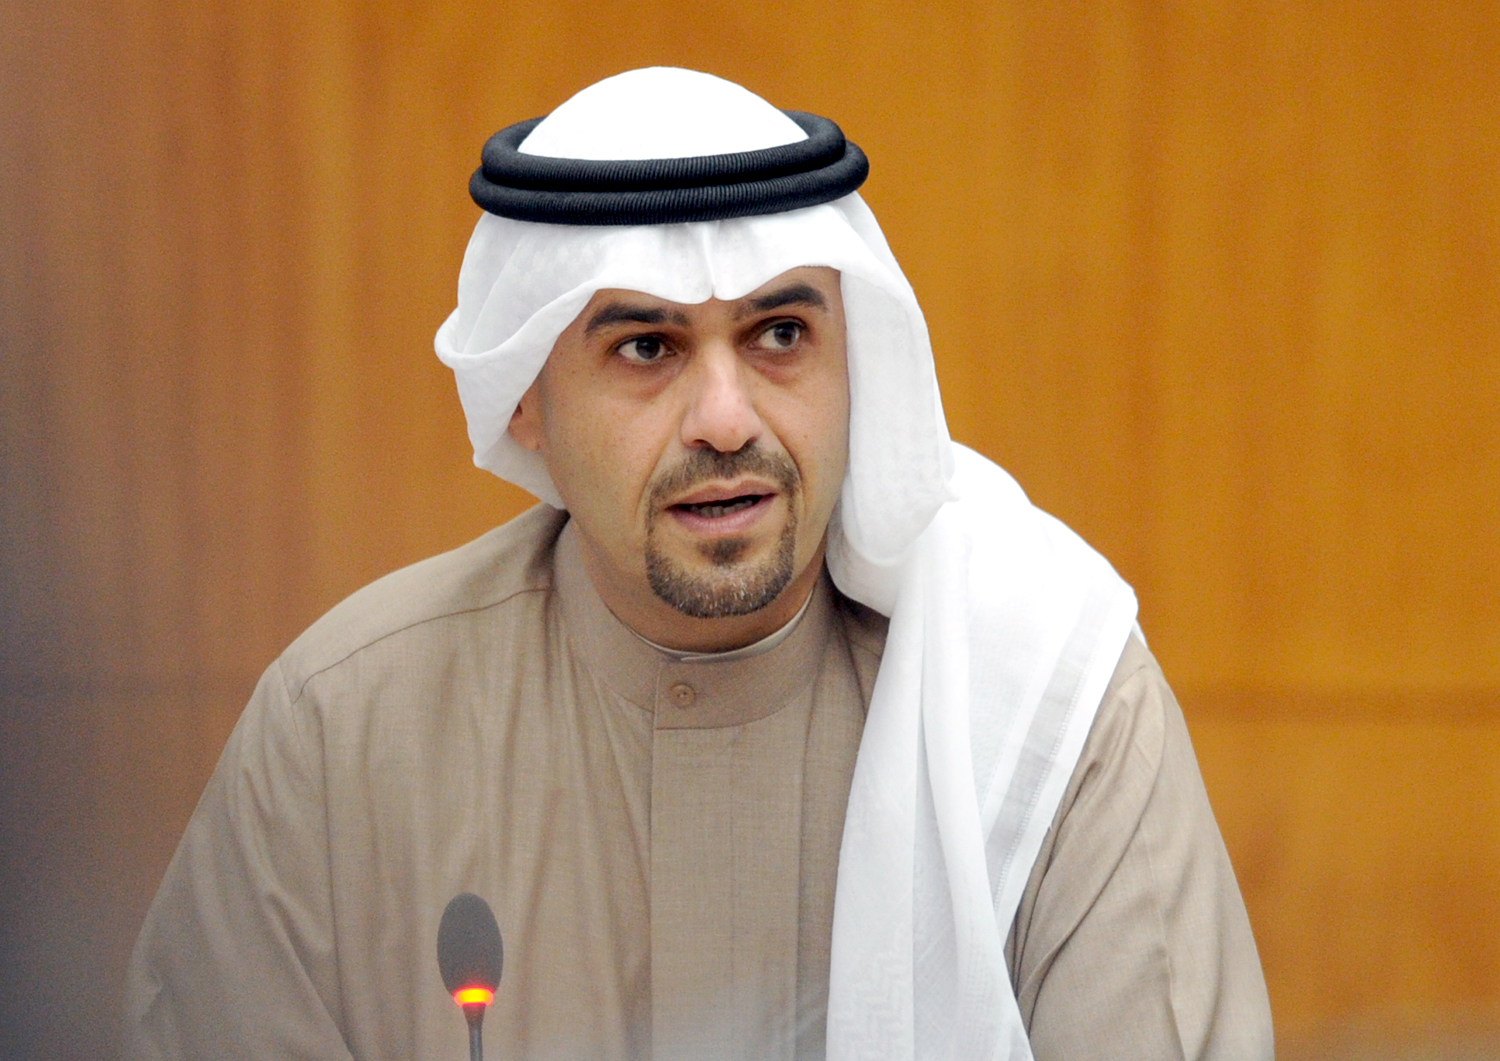 Deputy Prime Minister, Finance Minister and Acting Oil Minister Anas Al-Saleh